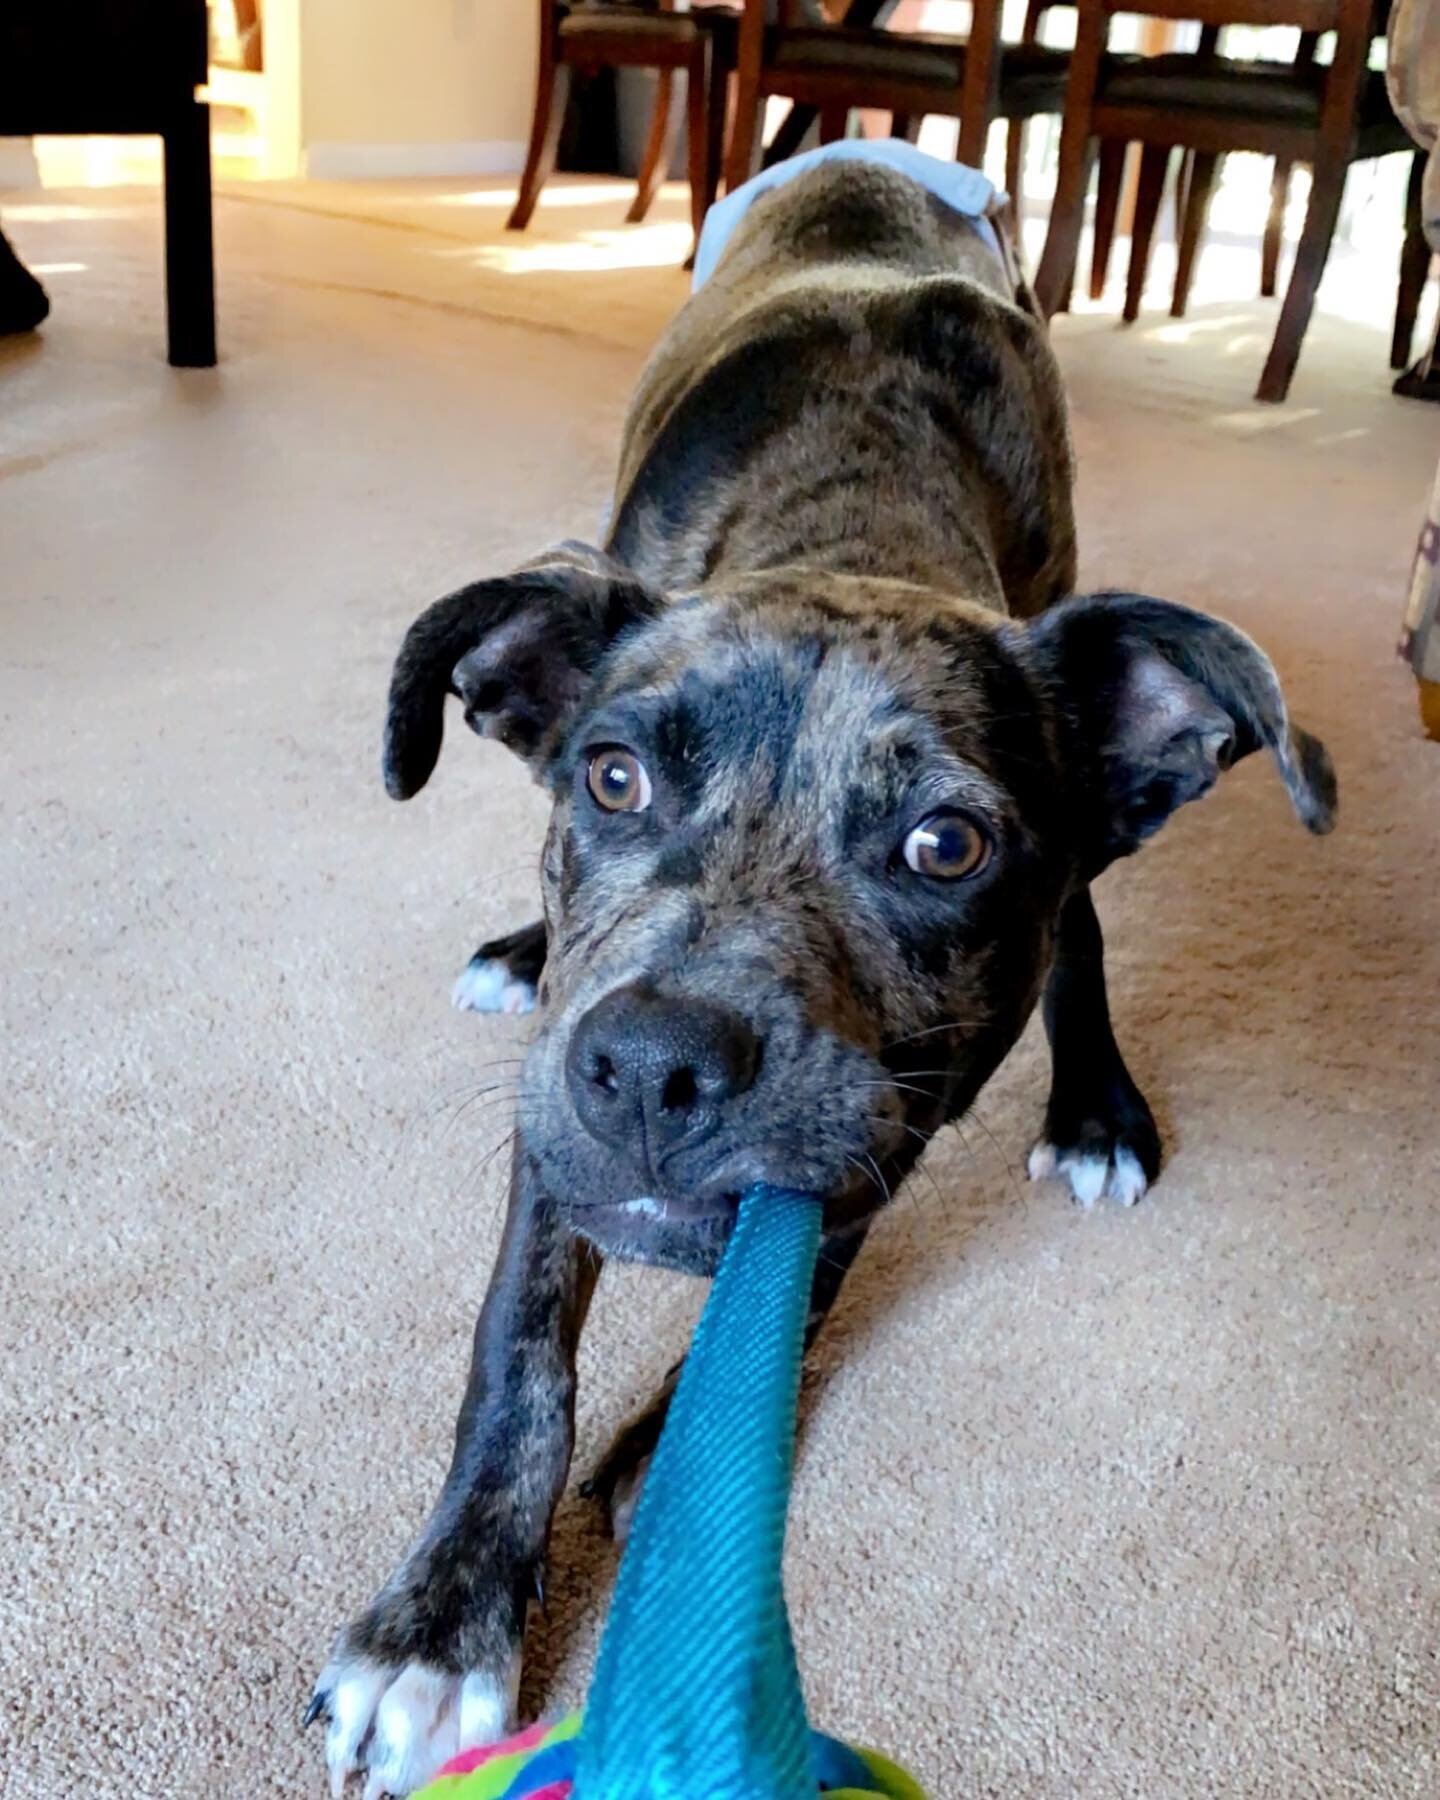 My man Rolo loves playing tug and playing with his flirt pole! What toys do you use to play/train with your best friend? 

.
.
.

Start training your dog with us today by DMing us or text/call us (201) 983-7699 to schedule a free consultation

.
.
.
